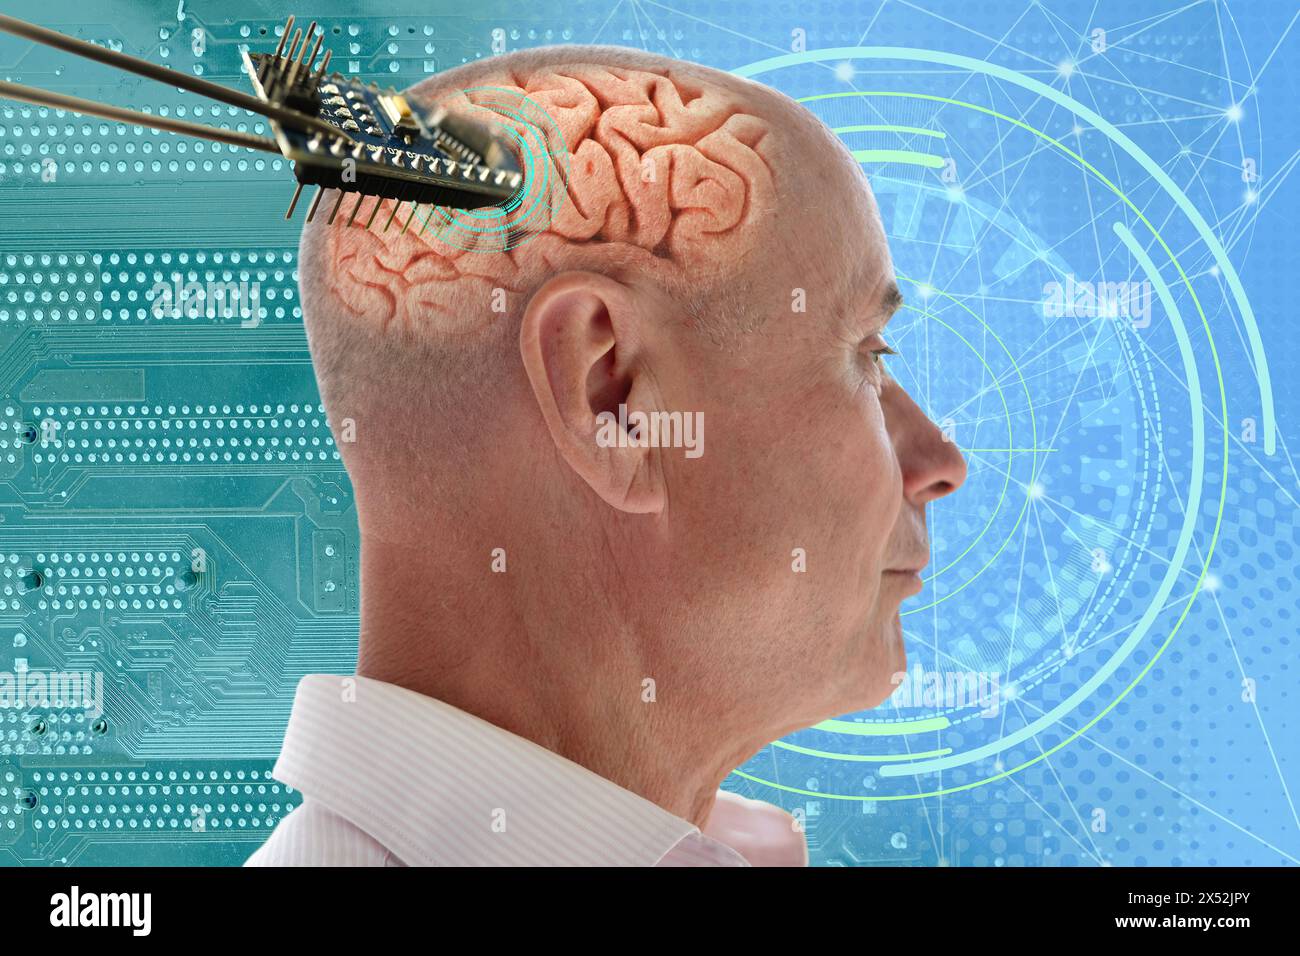 Installing electronic chip into human brain, applied in various fields neurotechnology and medical science, cutting-edge technology, restore sight Stock Photo